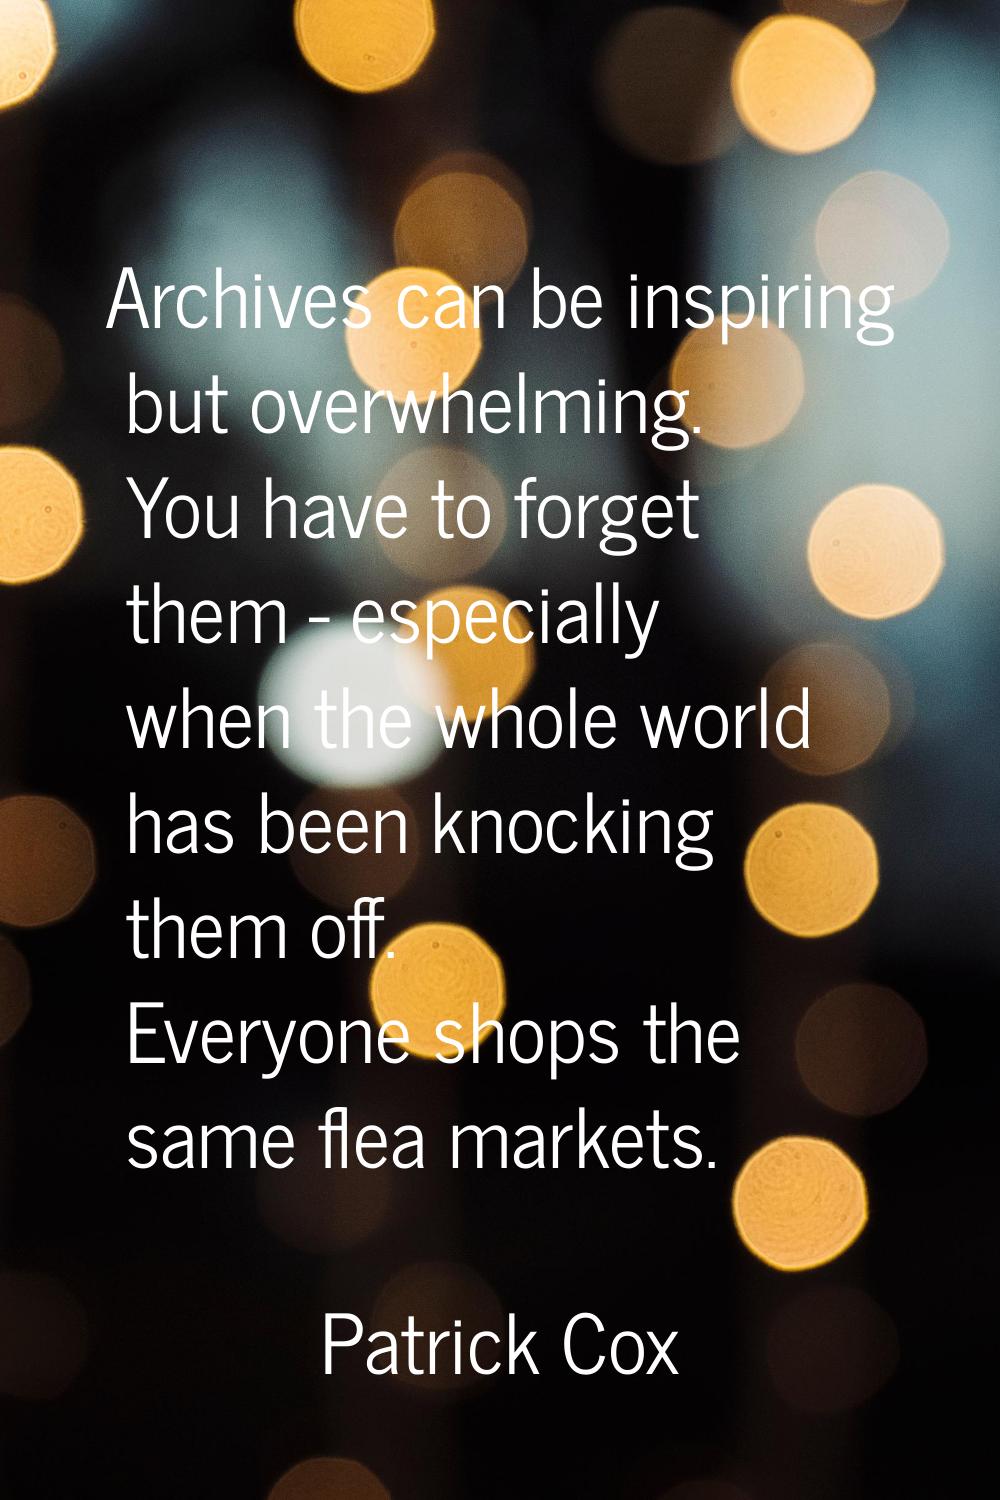 Archives can be inspiring but overwhelming. You have to forget them - especially when the whole wor